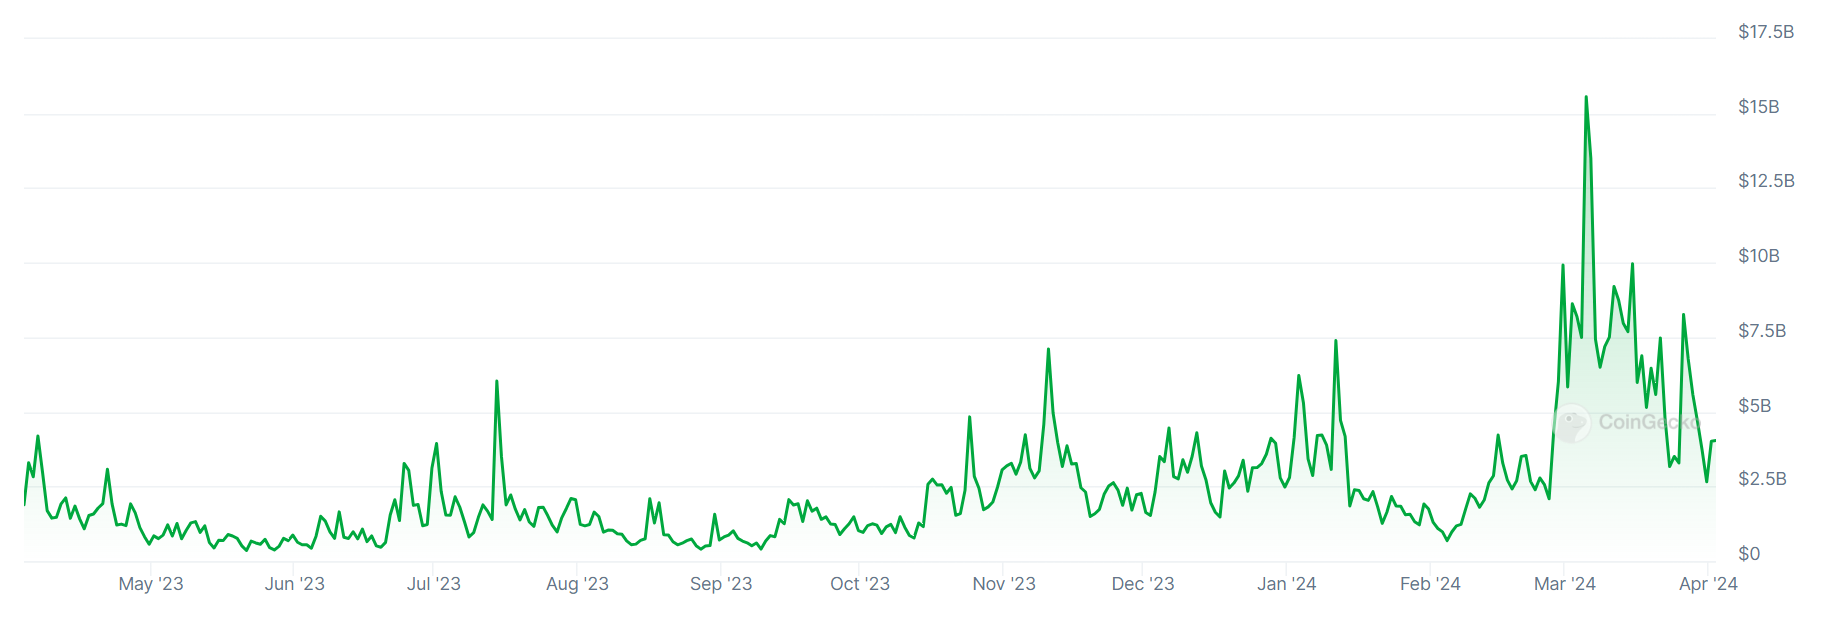 A graph showing trading volumes on South Korea’s Upbit crypto exchange over the past 12 months.